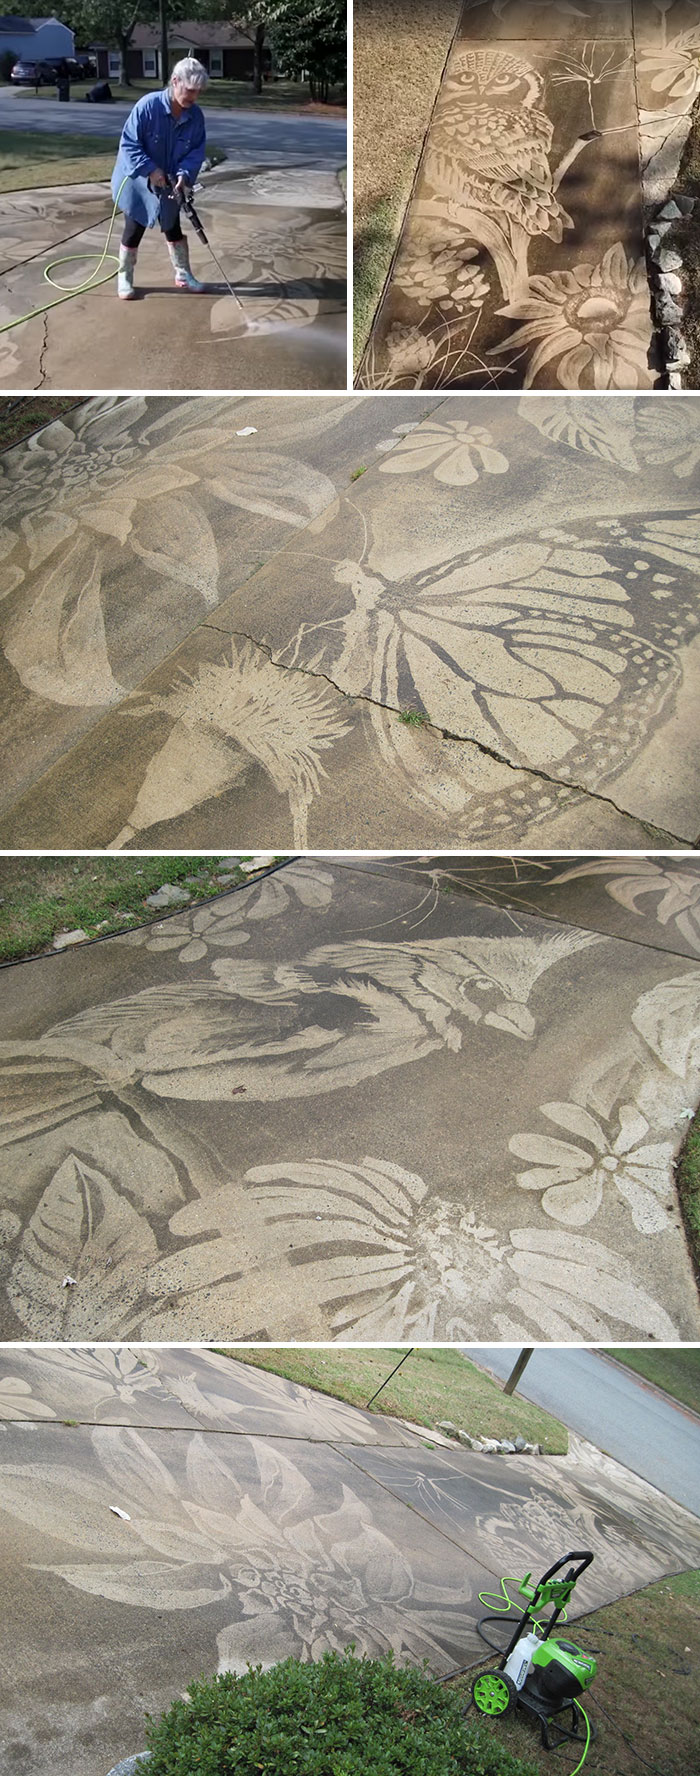 This Woman Uses The Power Washer She Got As A Birthday Gift To Unleash Her Creative Potential